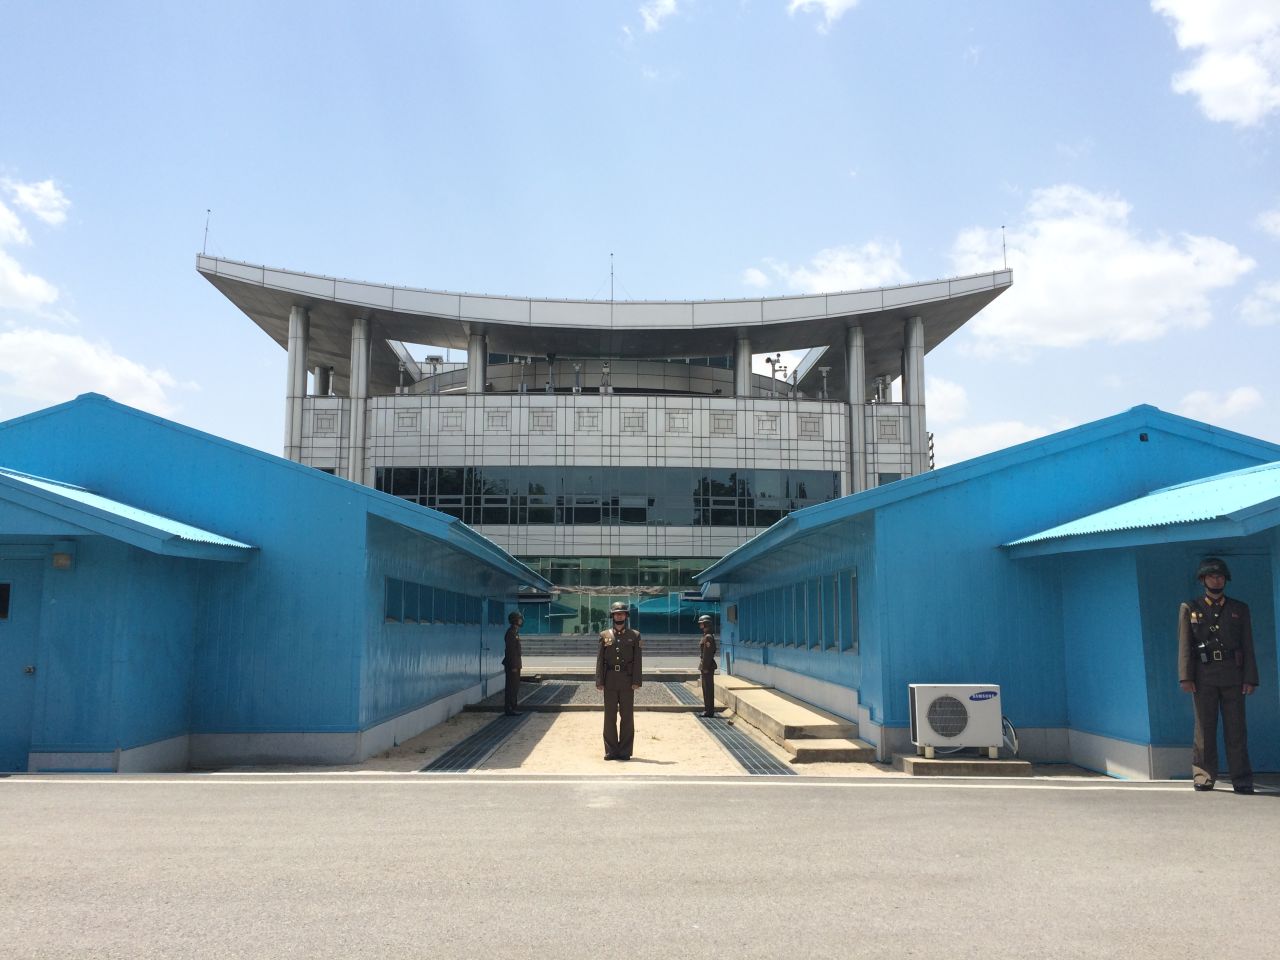 Soldiers stand guard on the North Korean side of the DMZ.